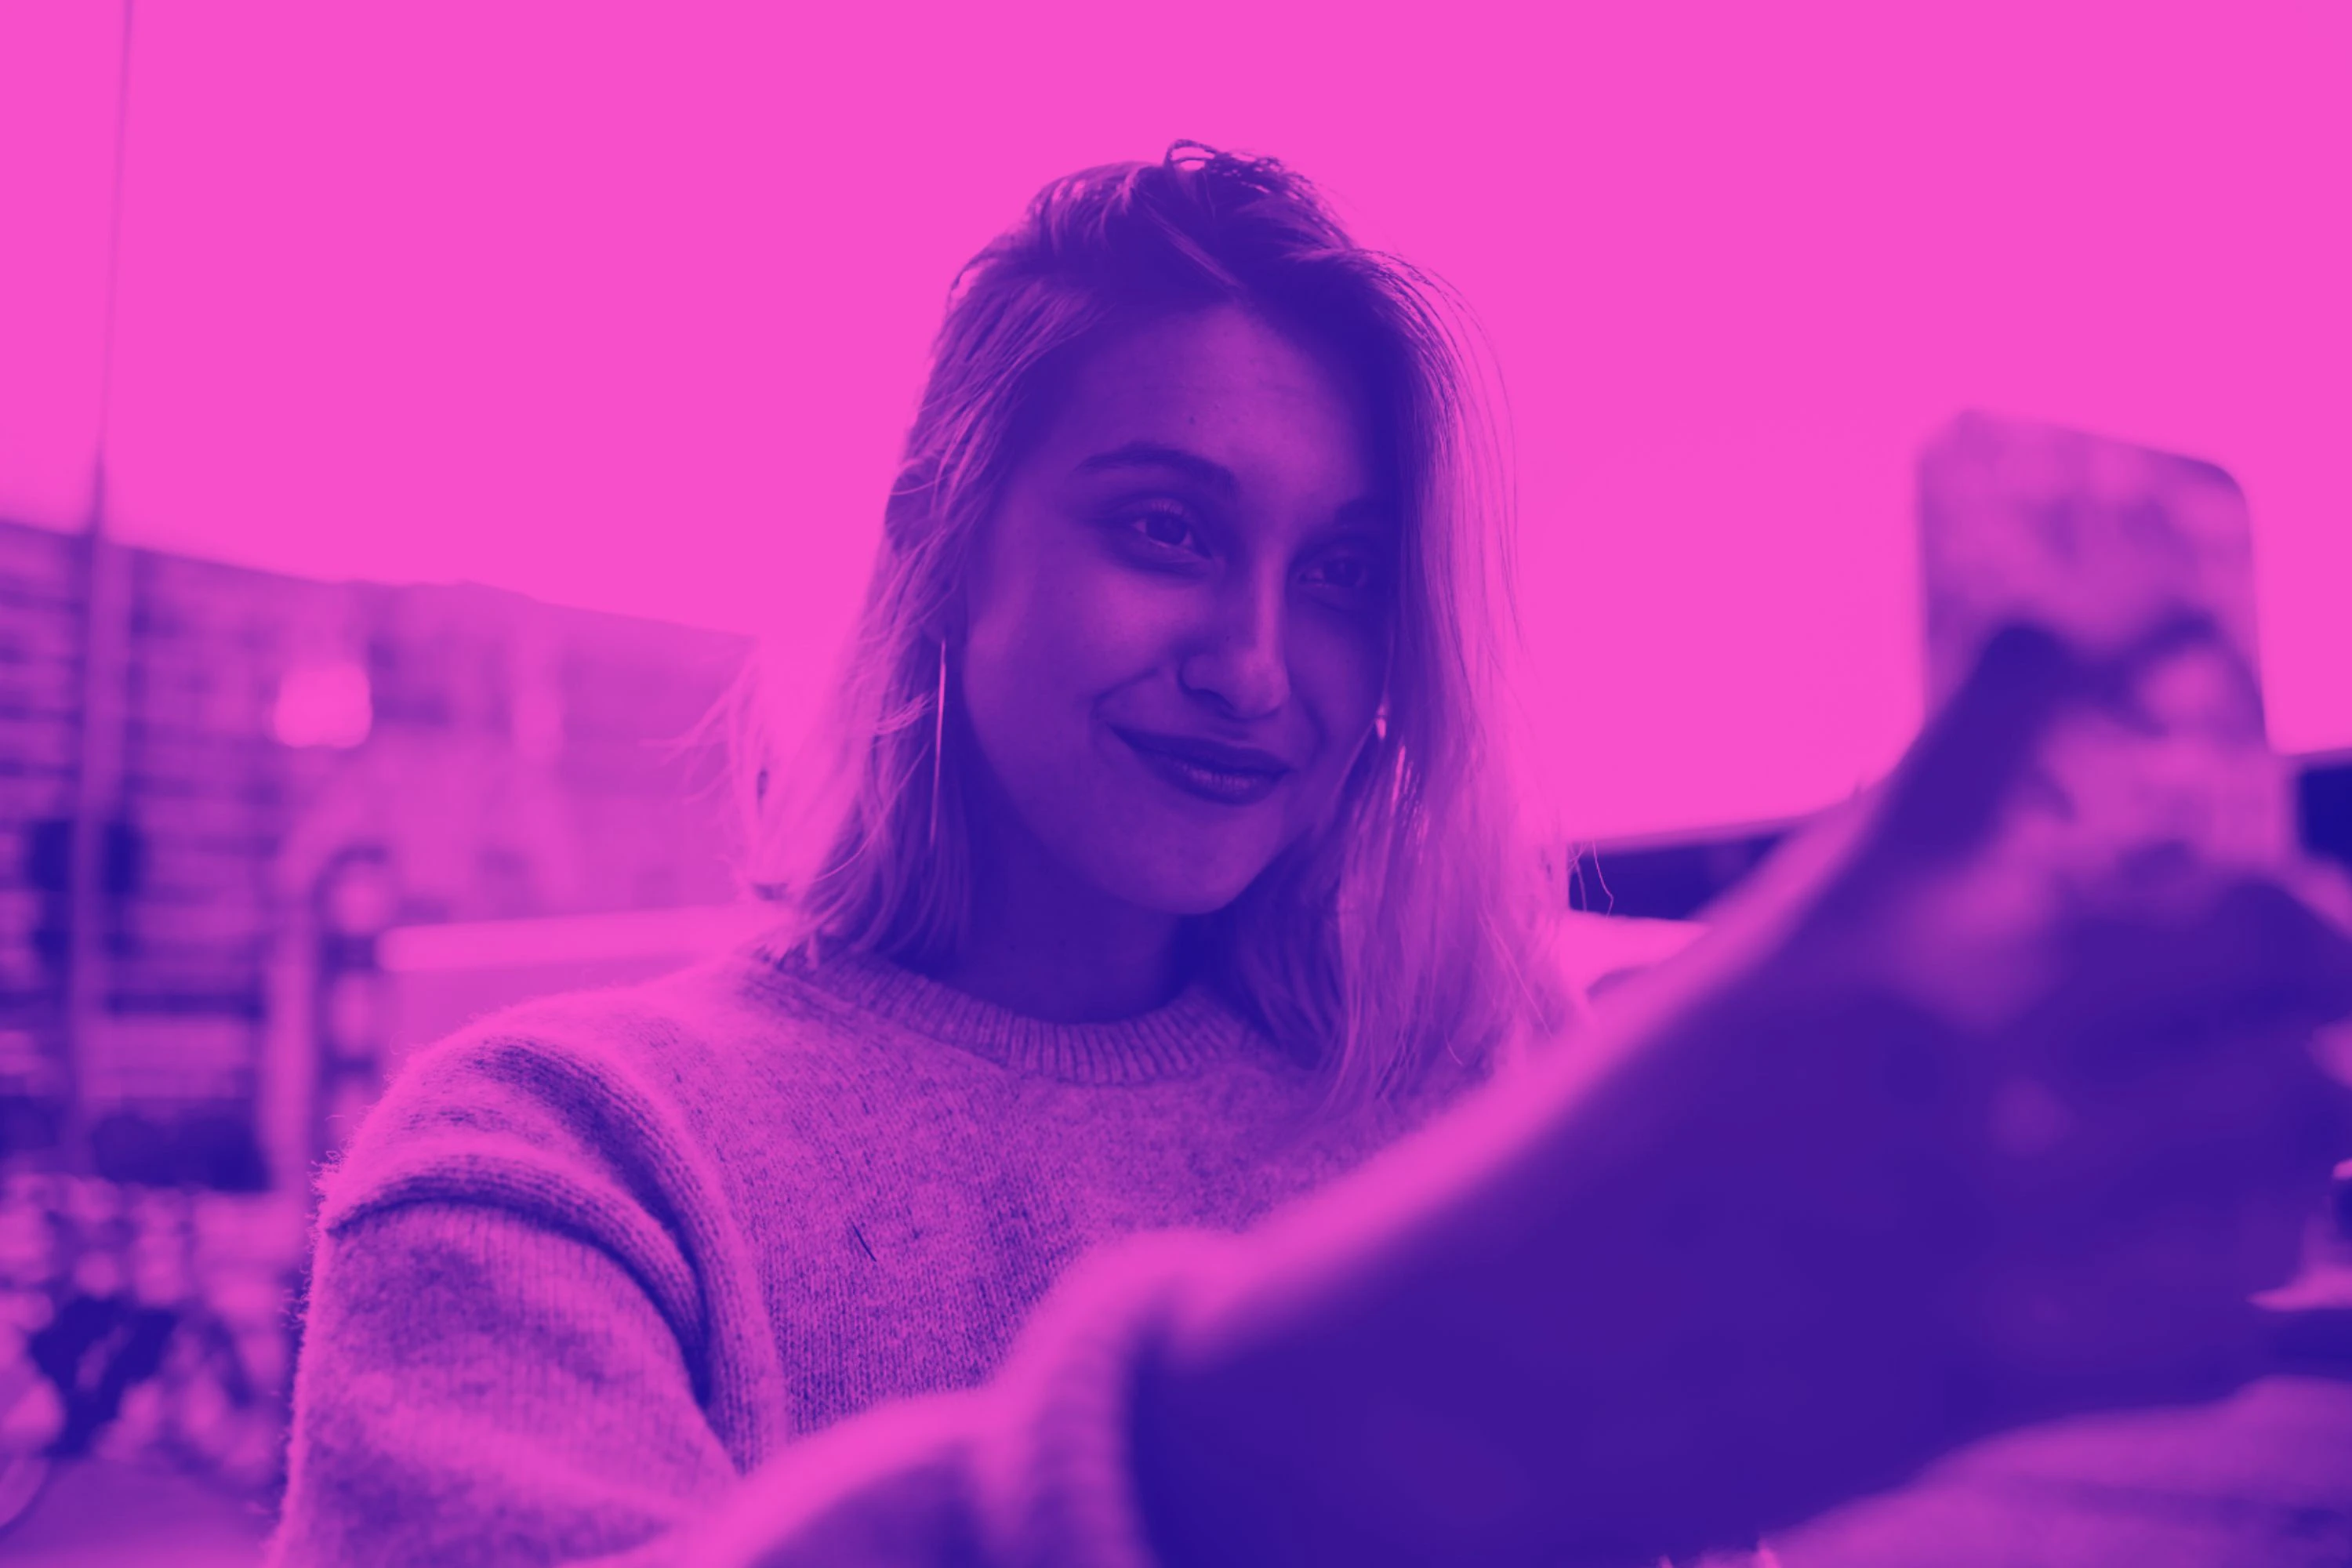 a girl on her phone, with pink and purple overlay